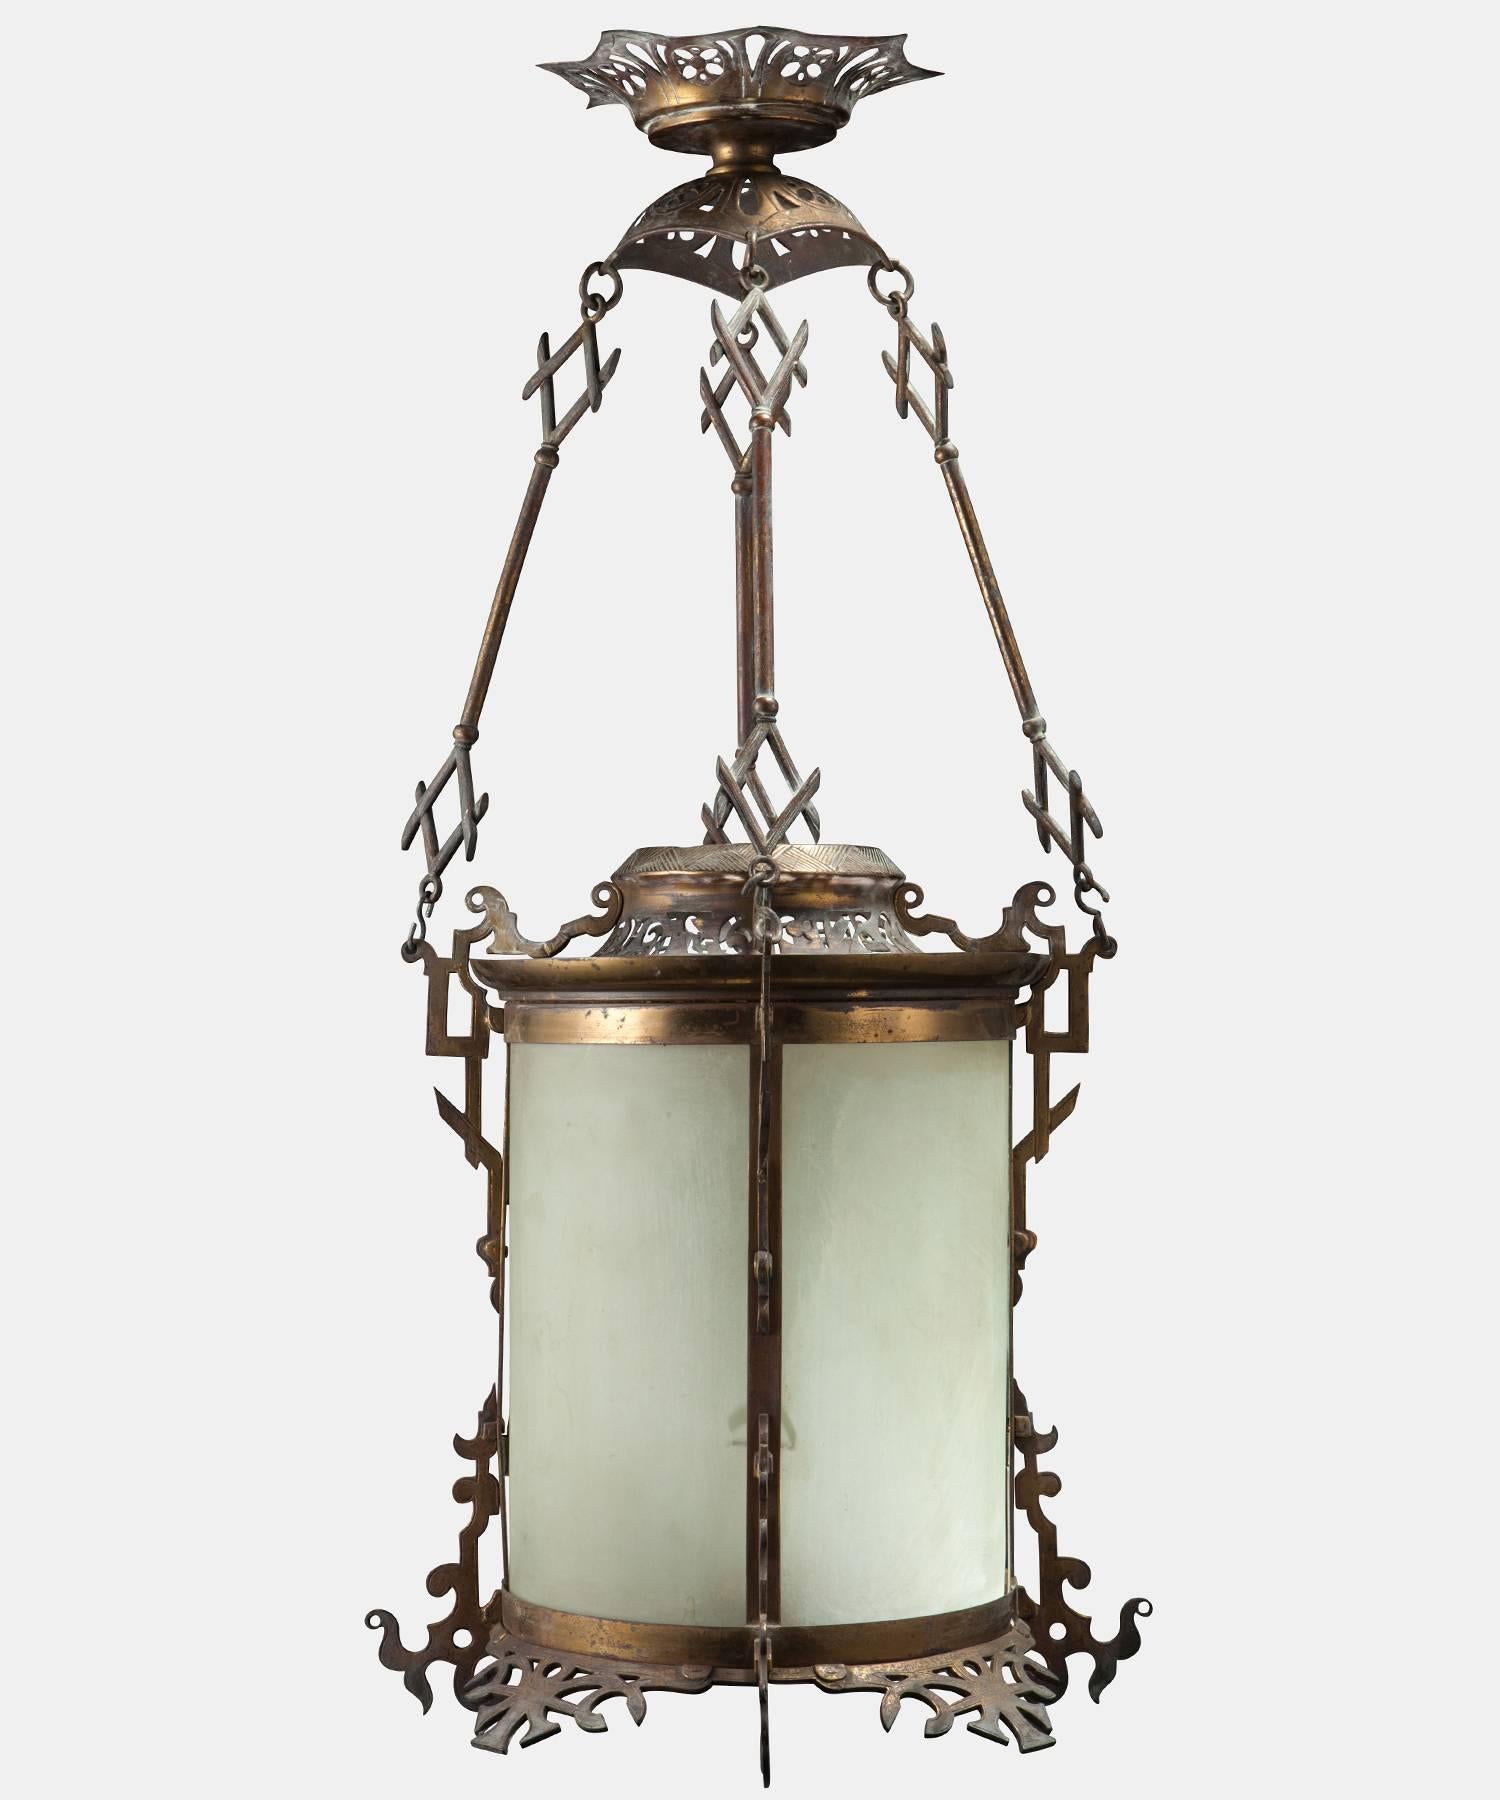 Art Nouveau period lantern. Ornate brass frame with frosted glass panels.